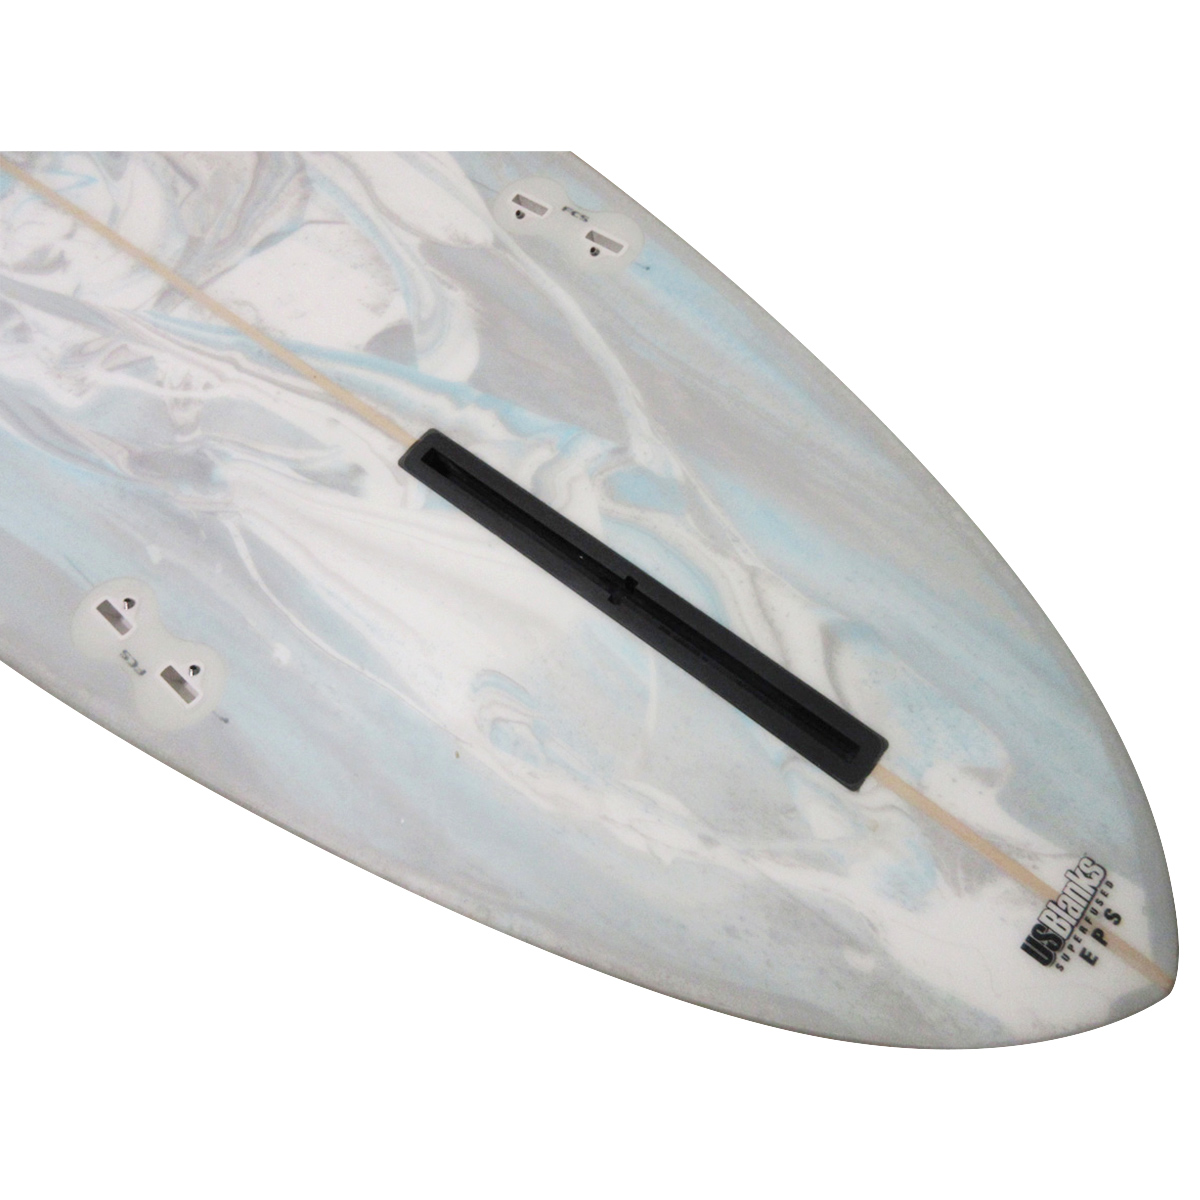 Soul Riders Surfboards / FLAVE 9`0